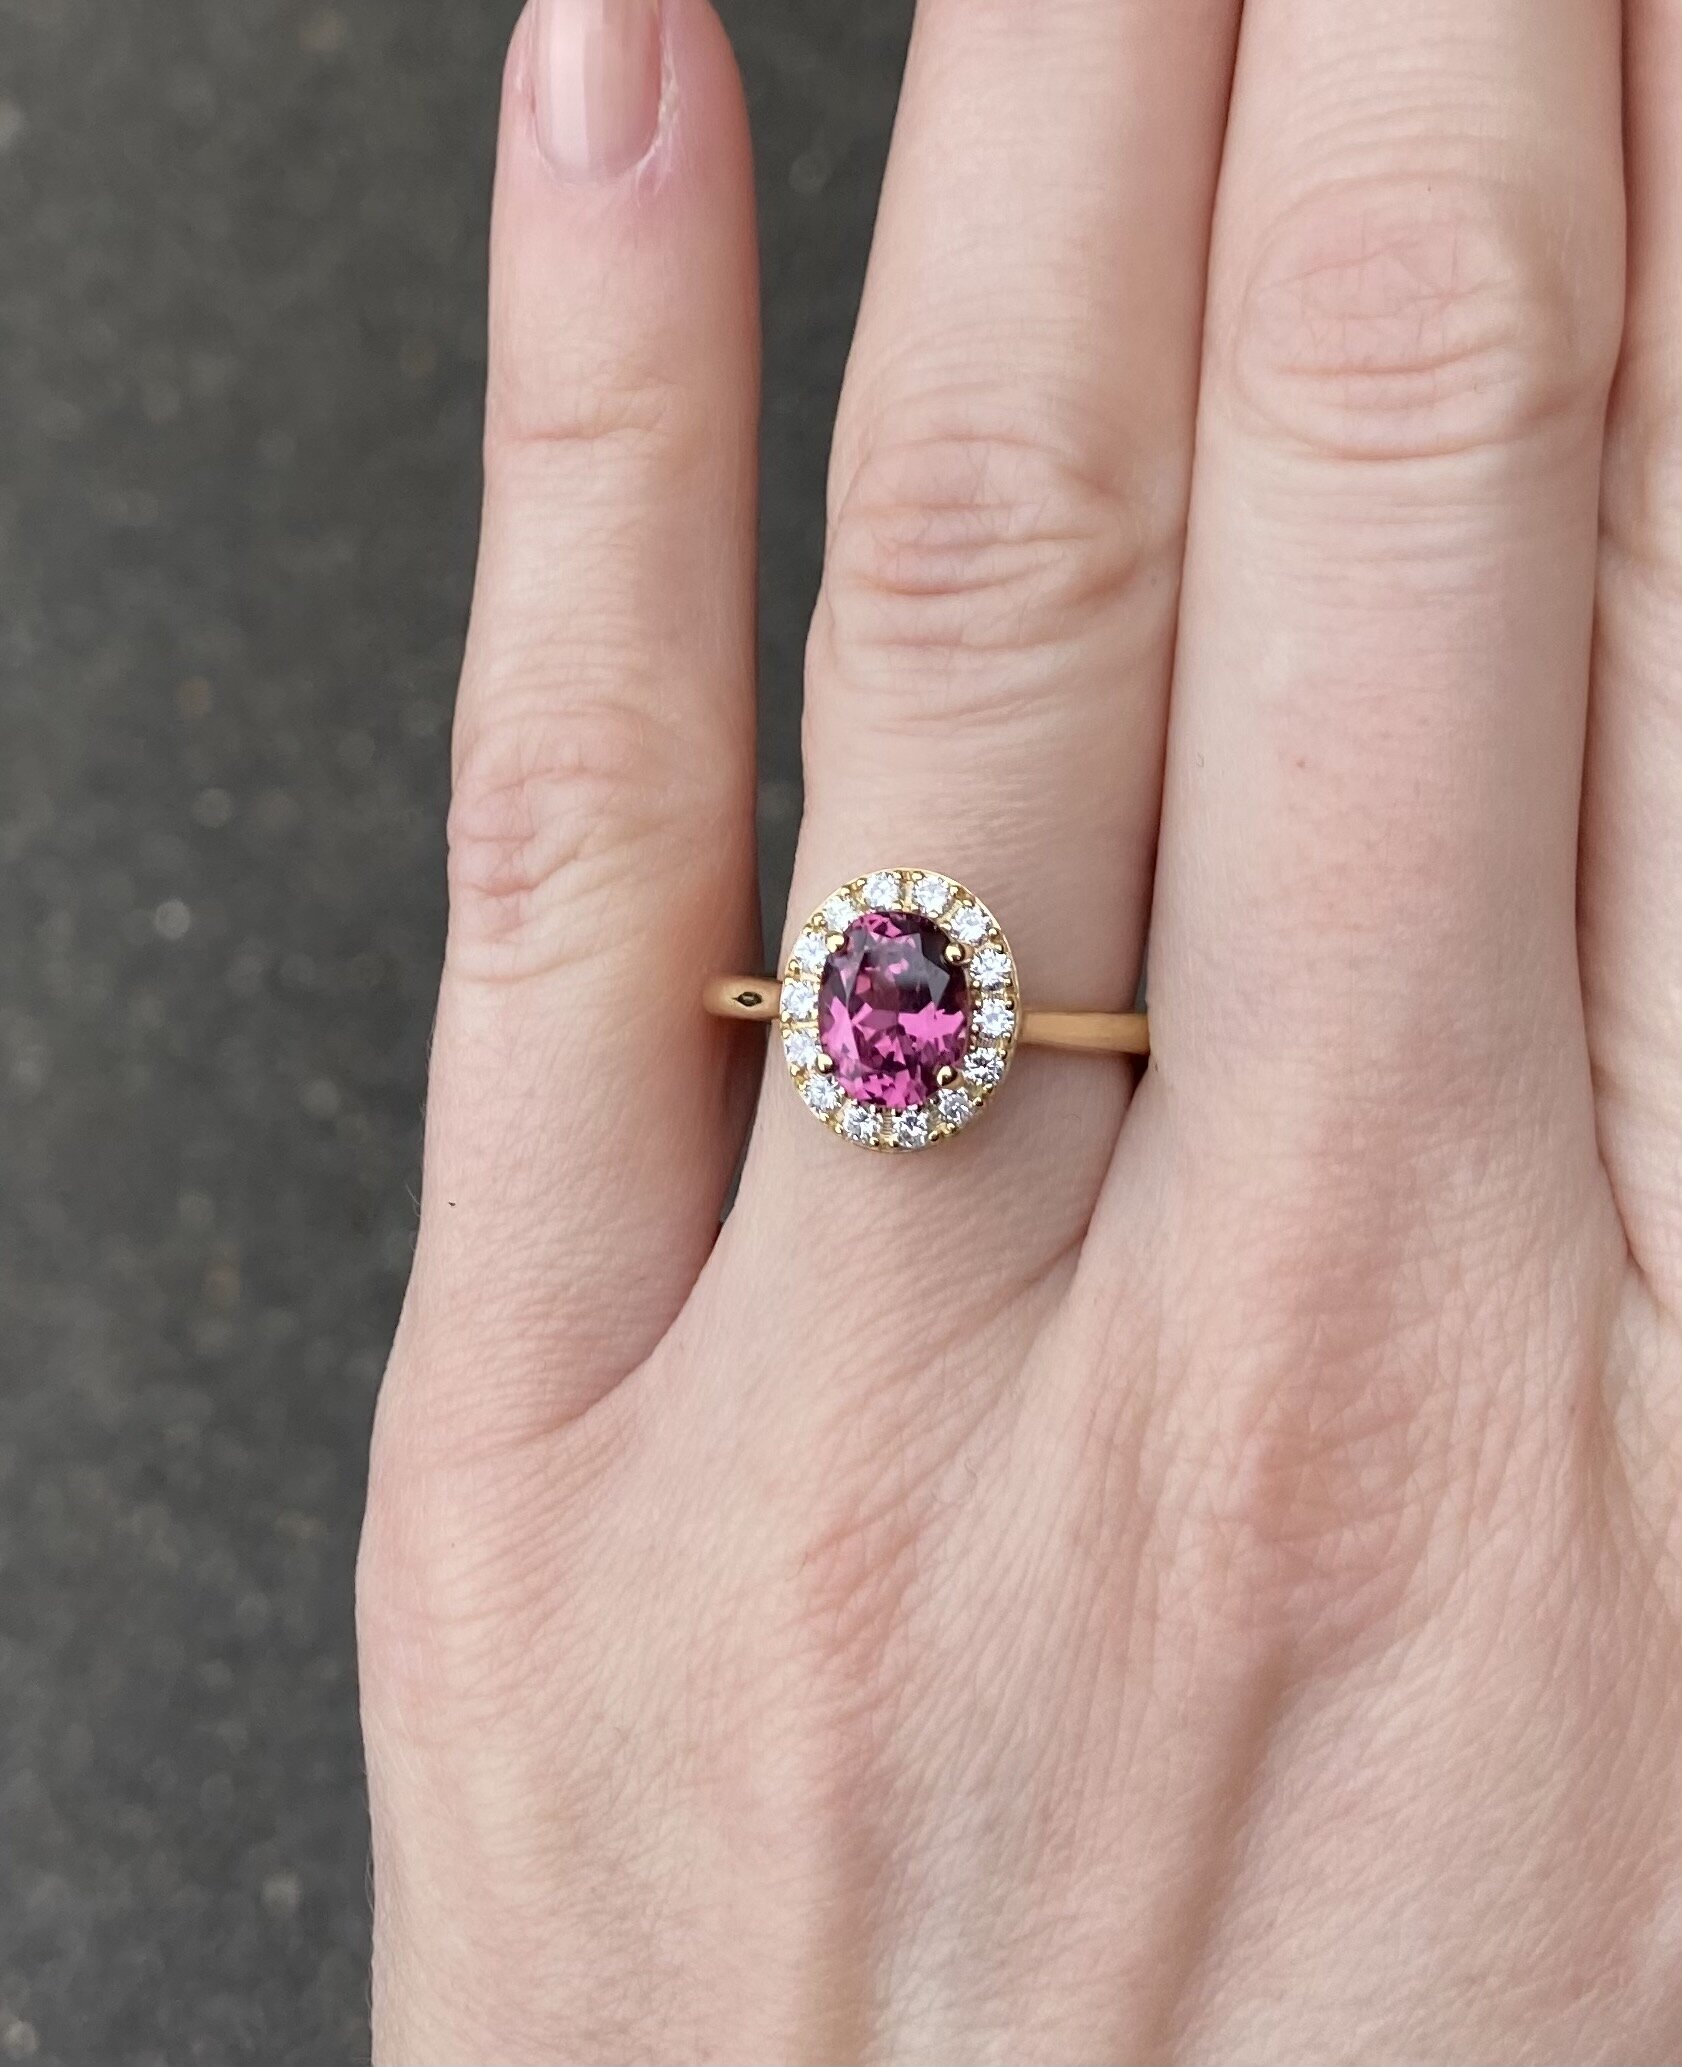 Purple spinel ring with diamonds, leaf engagement ring | Eden Garden Jewelry ™